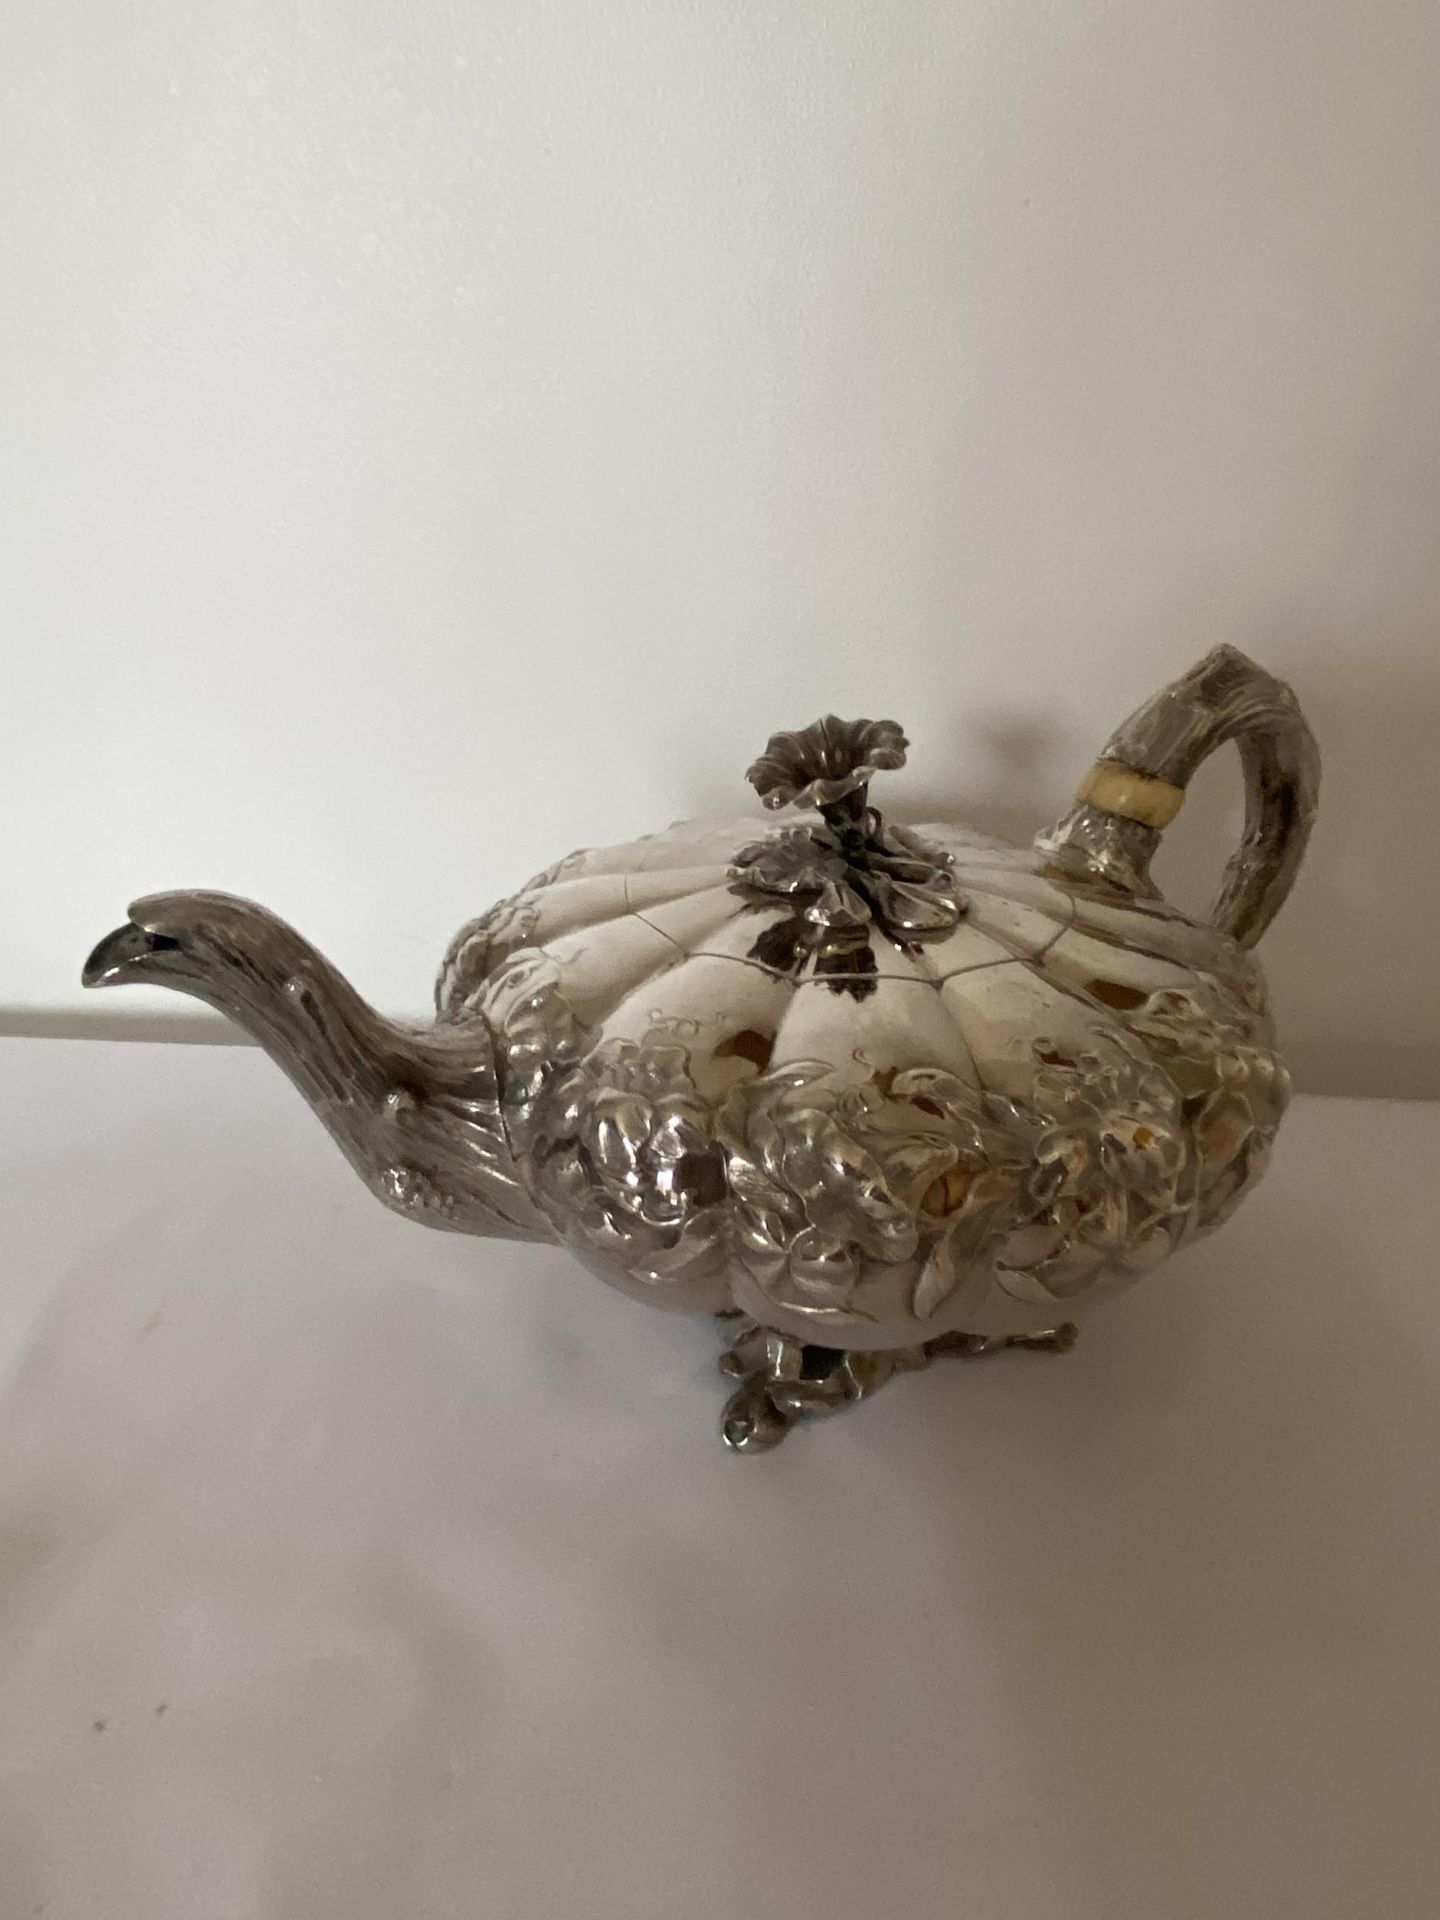 A VICTORIAN 1840 HALLMARKED LONDON SILVER TEAPOT, MAKER WC, POSSIBLY WILLIAM CHANDLESS, GROSS WEIGHT - Image 4 of 21